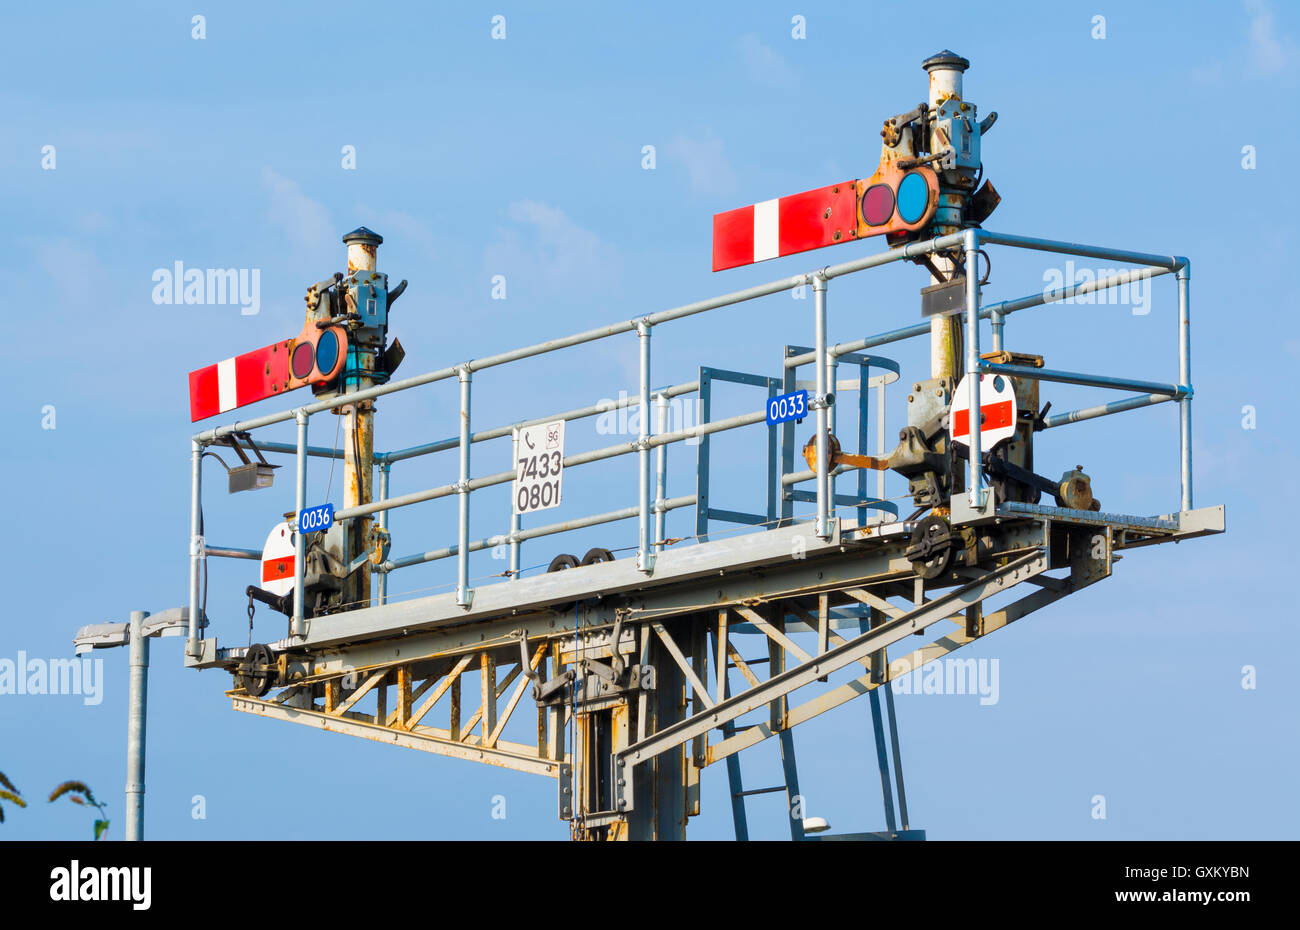 Old style semaphore stop signals on a British railway, both in the stop position, in England, UK. Stock Photo